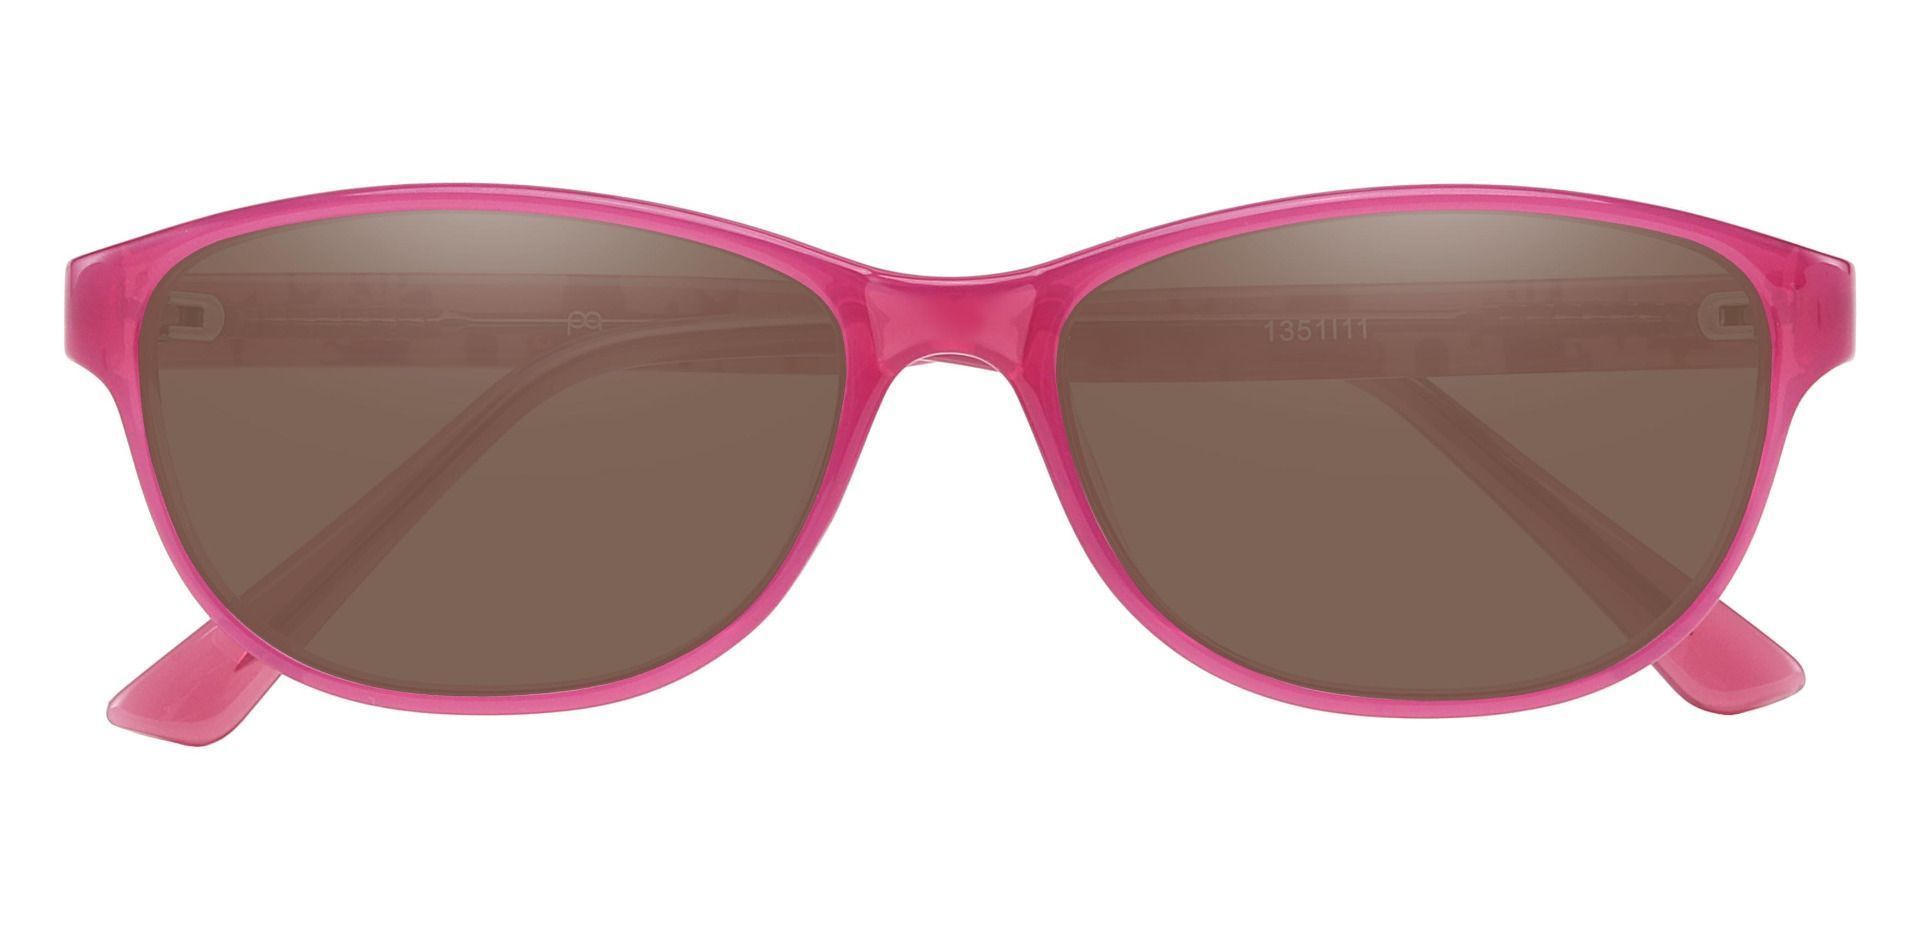 Patsy Oval Prescription Sunglasses - Pink Frame With Brown Lenses